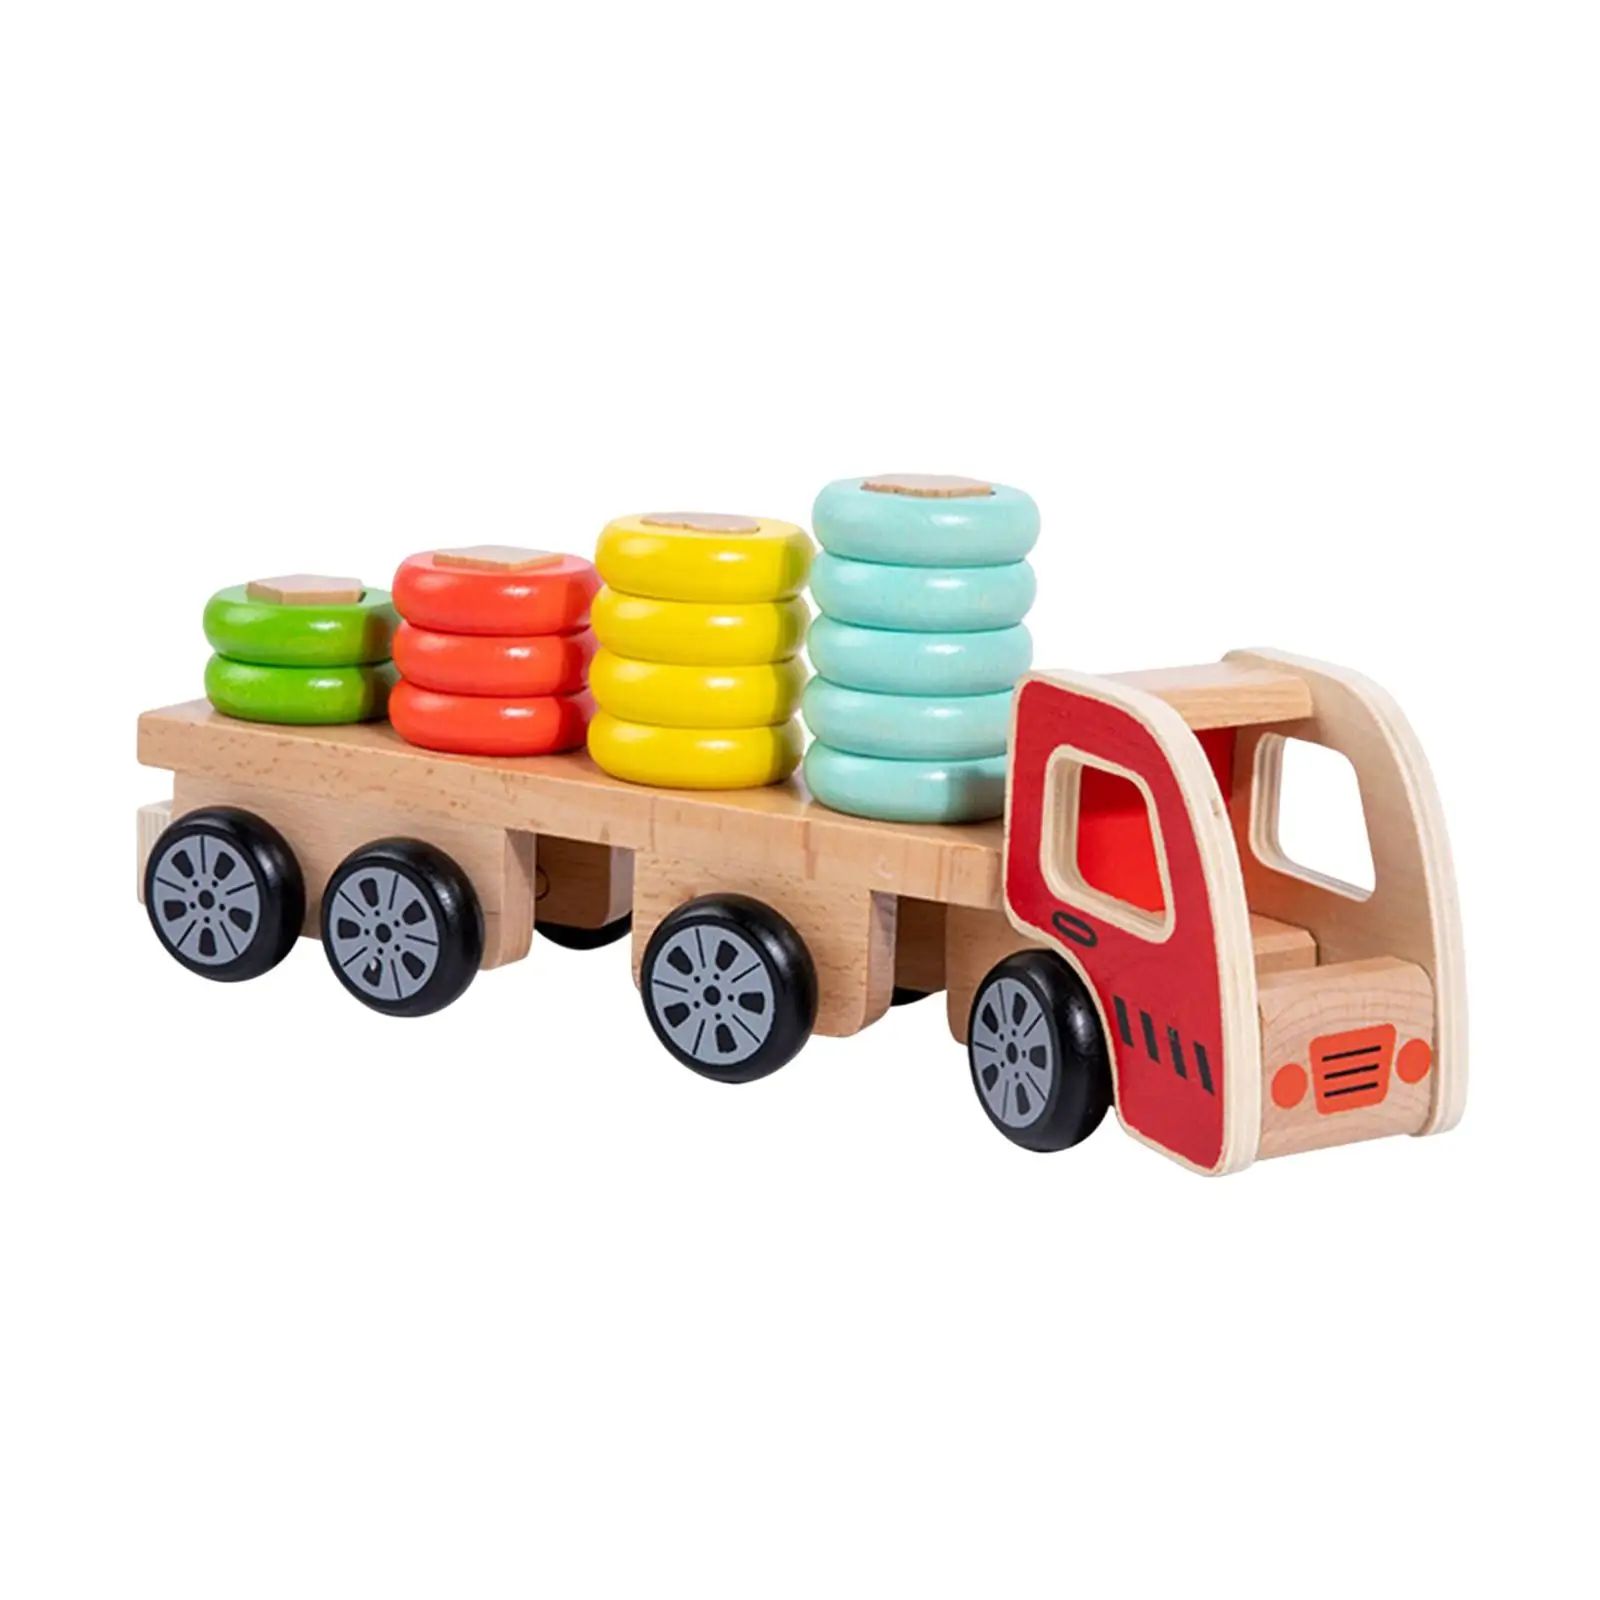 Wooden Sorting & Stacking Toys Wooden Stacking Train Toddler for Girls Boys